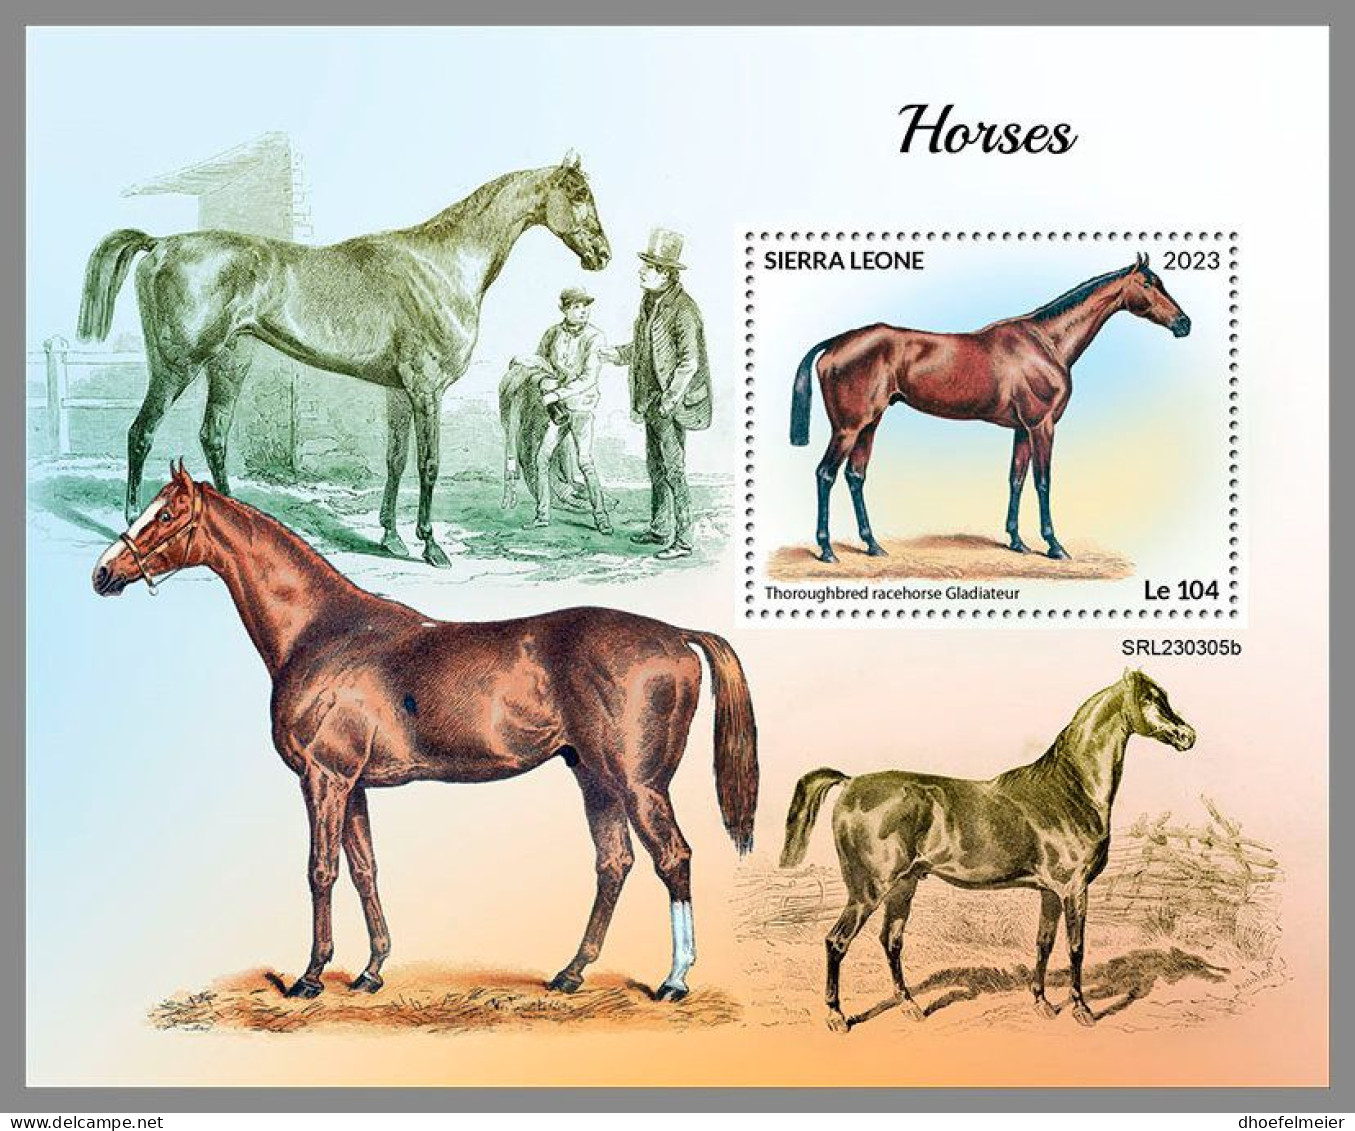 SIERRA LEONE 2023 MNH Horses Pferde S/S – OFFICIAL ISSUE – DHQ2418 - Caballos